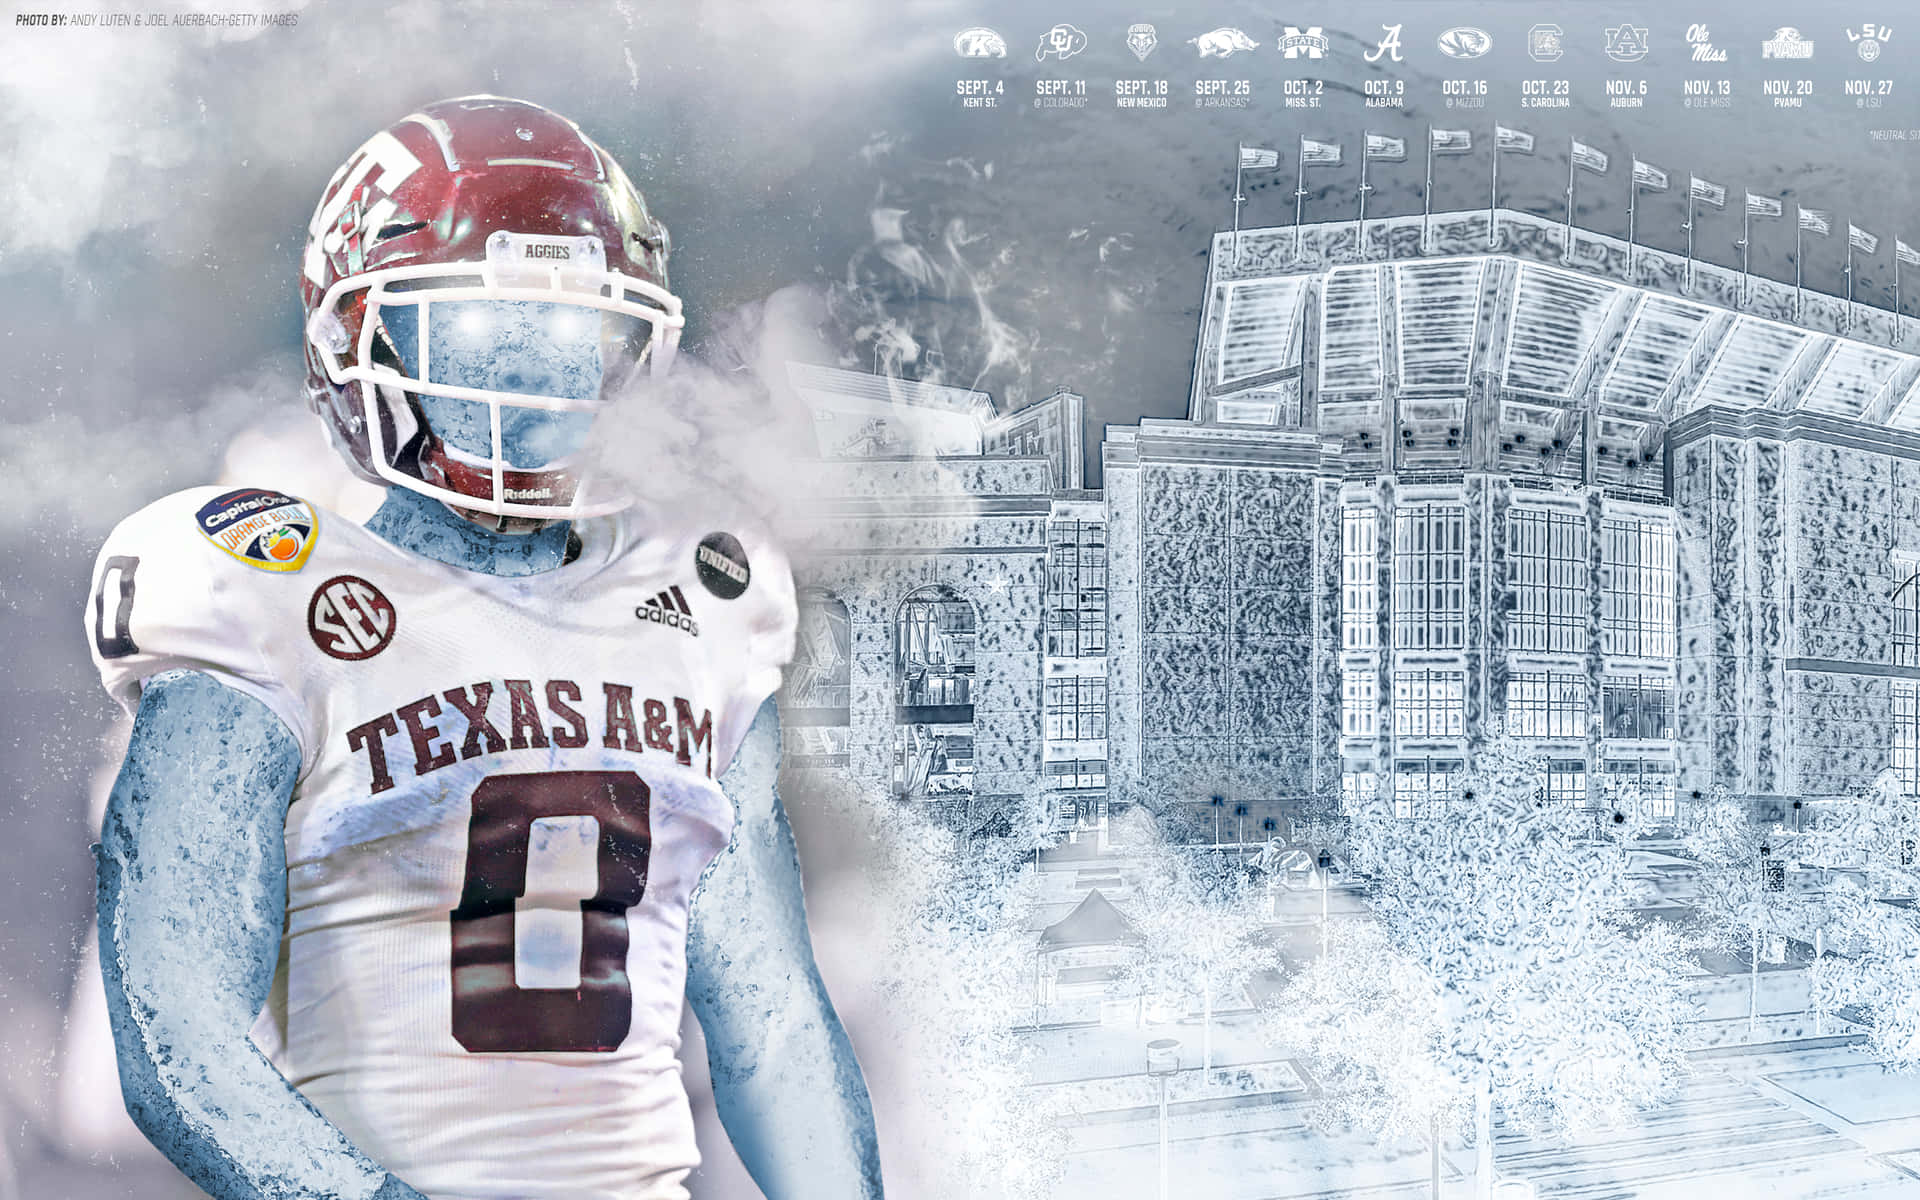 Looking to the future with Texas A&M. Wallpaper